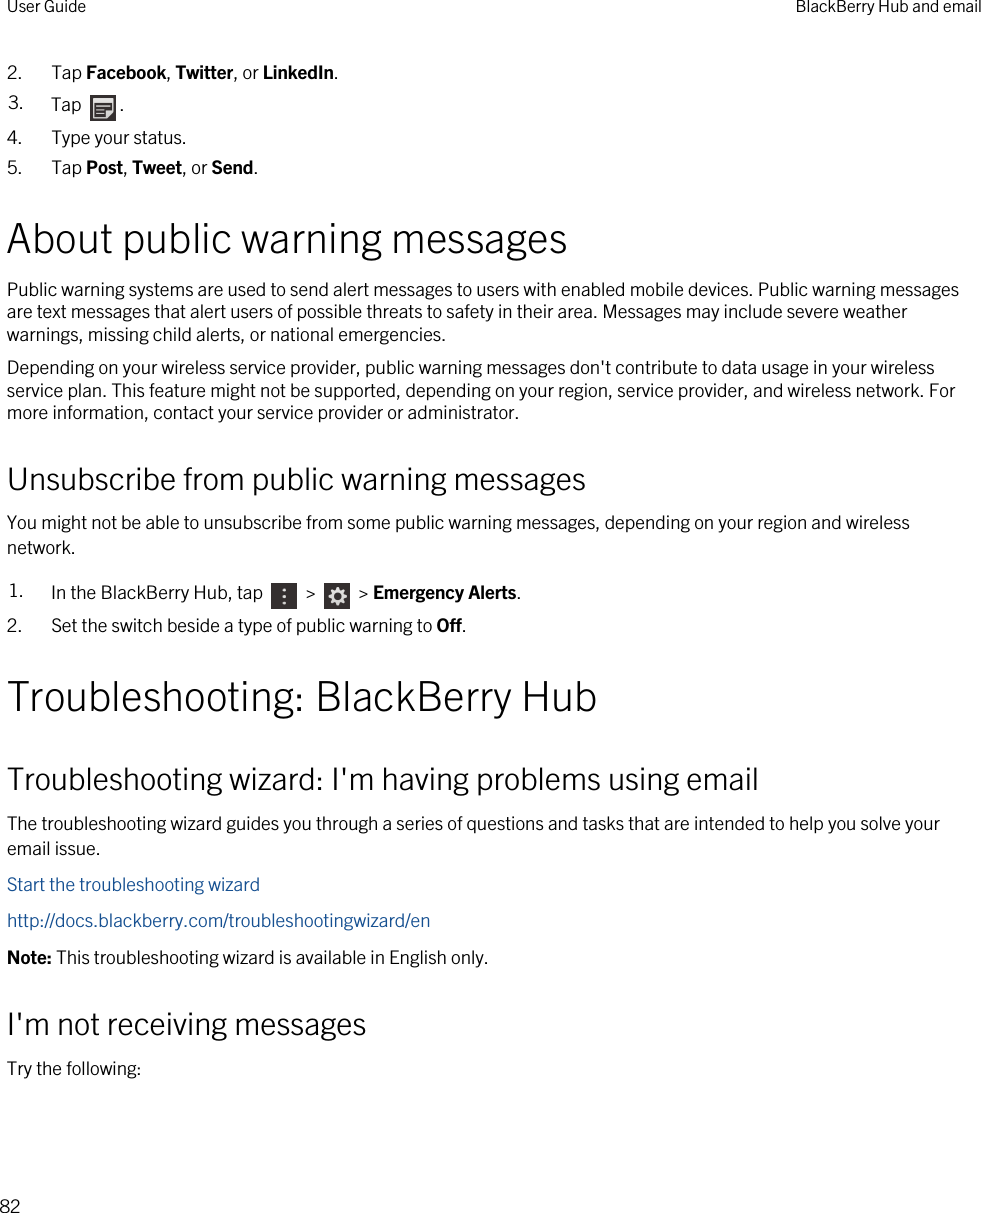 2. Tap Facebook, Twitter, or LinkedIn.3. Tap  .4. Type your status.5. Tap Post, Tweet, or Send.About public warning messagesPublic warning systems are used to send alert messages to users with enabled mobile devices. Public warning messages are text messages that alert users of possible threats to safety in their area. Messages may include severe weather warnings, missing child alerts, or national emergencies.Depending on your wireless service provider, public warning messages don&apos;t contribute to data usage in your wireless service plan. This feature might not be supported, depending on your region, service provider, and wireless network. For more information, contact your service provider or administrator.Unsubscribe from public warning messagesYou might not be able to unsubscribe from some public warning messages, depending on your region and wireless network.1. In the BlackBerry Hub, tap   &gt;   &gt; Emergency Alerts.2. Set the switch beside a type of public warning to Off.Troubleshooting: BlackBerry HubTroubleshooting wizard: I&apos;m having problems using emailThe troubleshooting wizard guides you through a series of questions and tasks that are intended to help you solve your email issue.Start the troubleshooting wizardhttp://docs.blackberry.com/troubleshootingwizard/enNote: This troubleshooting wizard is available in English only.I&apos;m not receiving messagesTry the following:User Guide BlackBerry Hub and email82